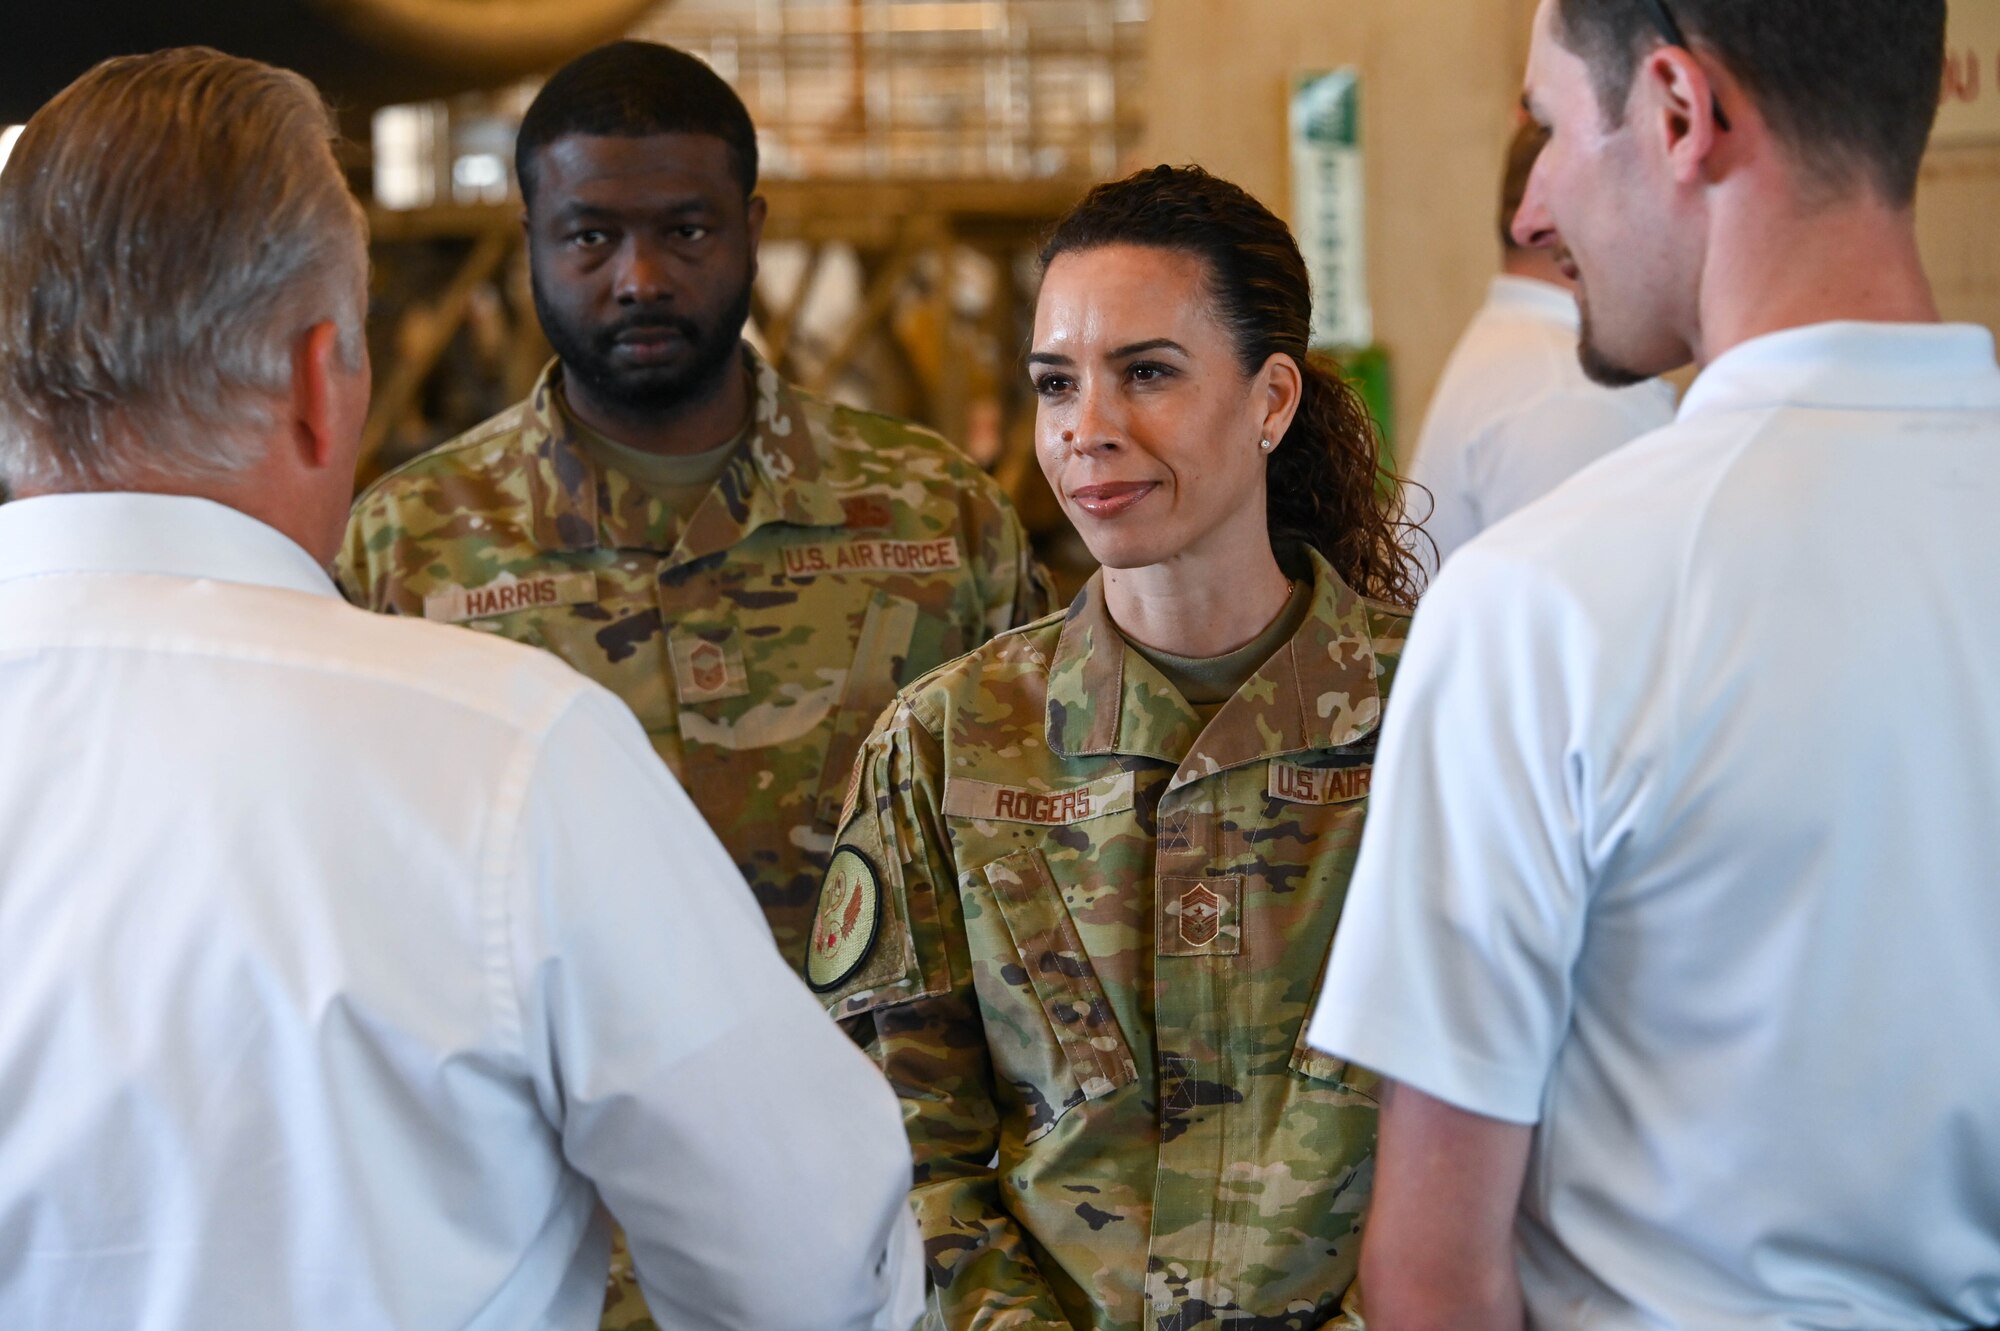 U.S. Air Force Chief Master Sgt. Kristina Rogers, 19th Air Force command chief, listens to a brief from 97th Maintenance Group (MXG) members at Altus Air Force Base (AAFB), Oklahoma, March 31, 2022. The 97th MXG maintainers briefed Rogers on the A-Team’s role at AAFB before showing her the maintenance process of a C-17 Globemaster III. (U.S. Air Force photo by Senior Airman Kayla Christenson)